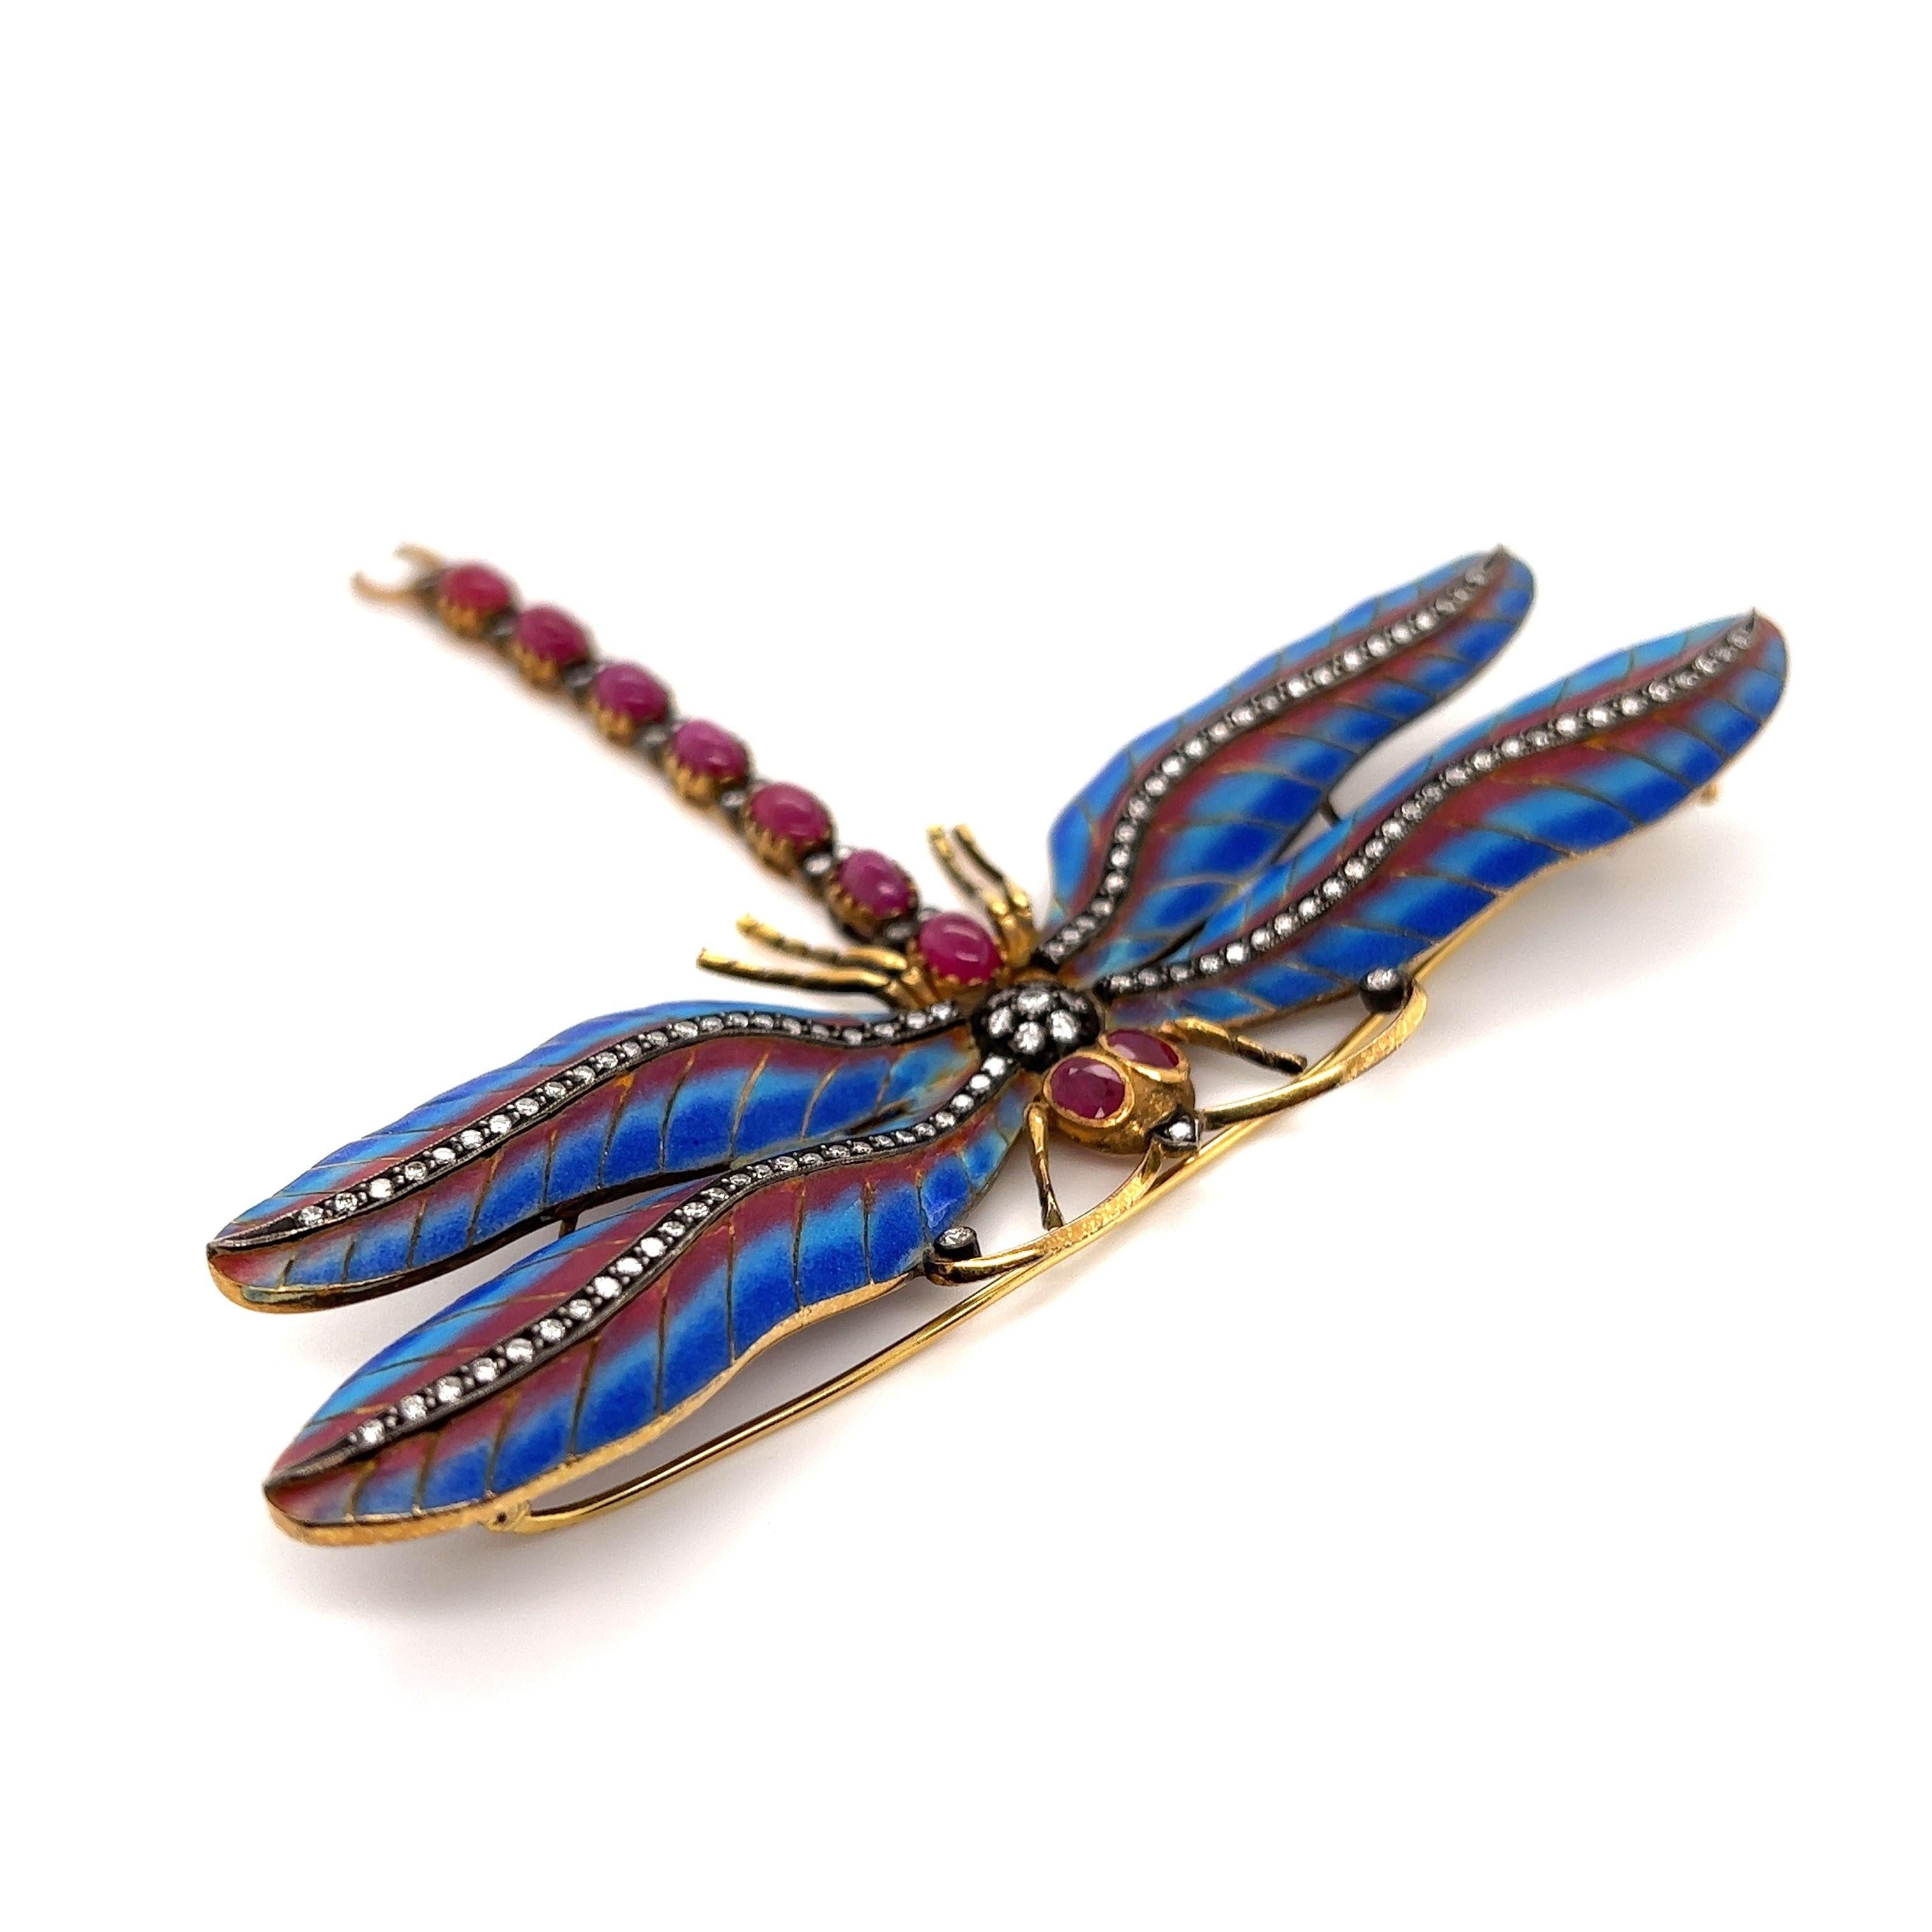 Simply Fabulous! Plique-à-Jour Dragonfly Brooch with Blue and Red enamel wings, Hand set with Rubies, approx. 3.5tcw and Diamonds, approx. 1.16tcw.  Hand crafted in 18 Karat Yellow Gold. Approx. size: 4” tall. This pin is in excellent vintage